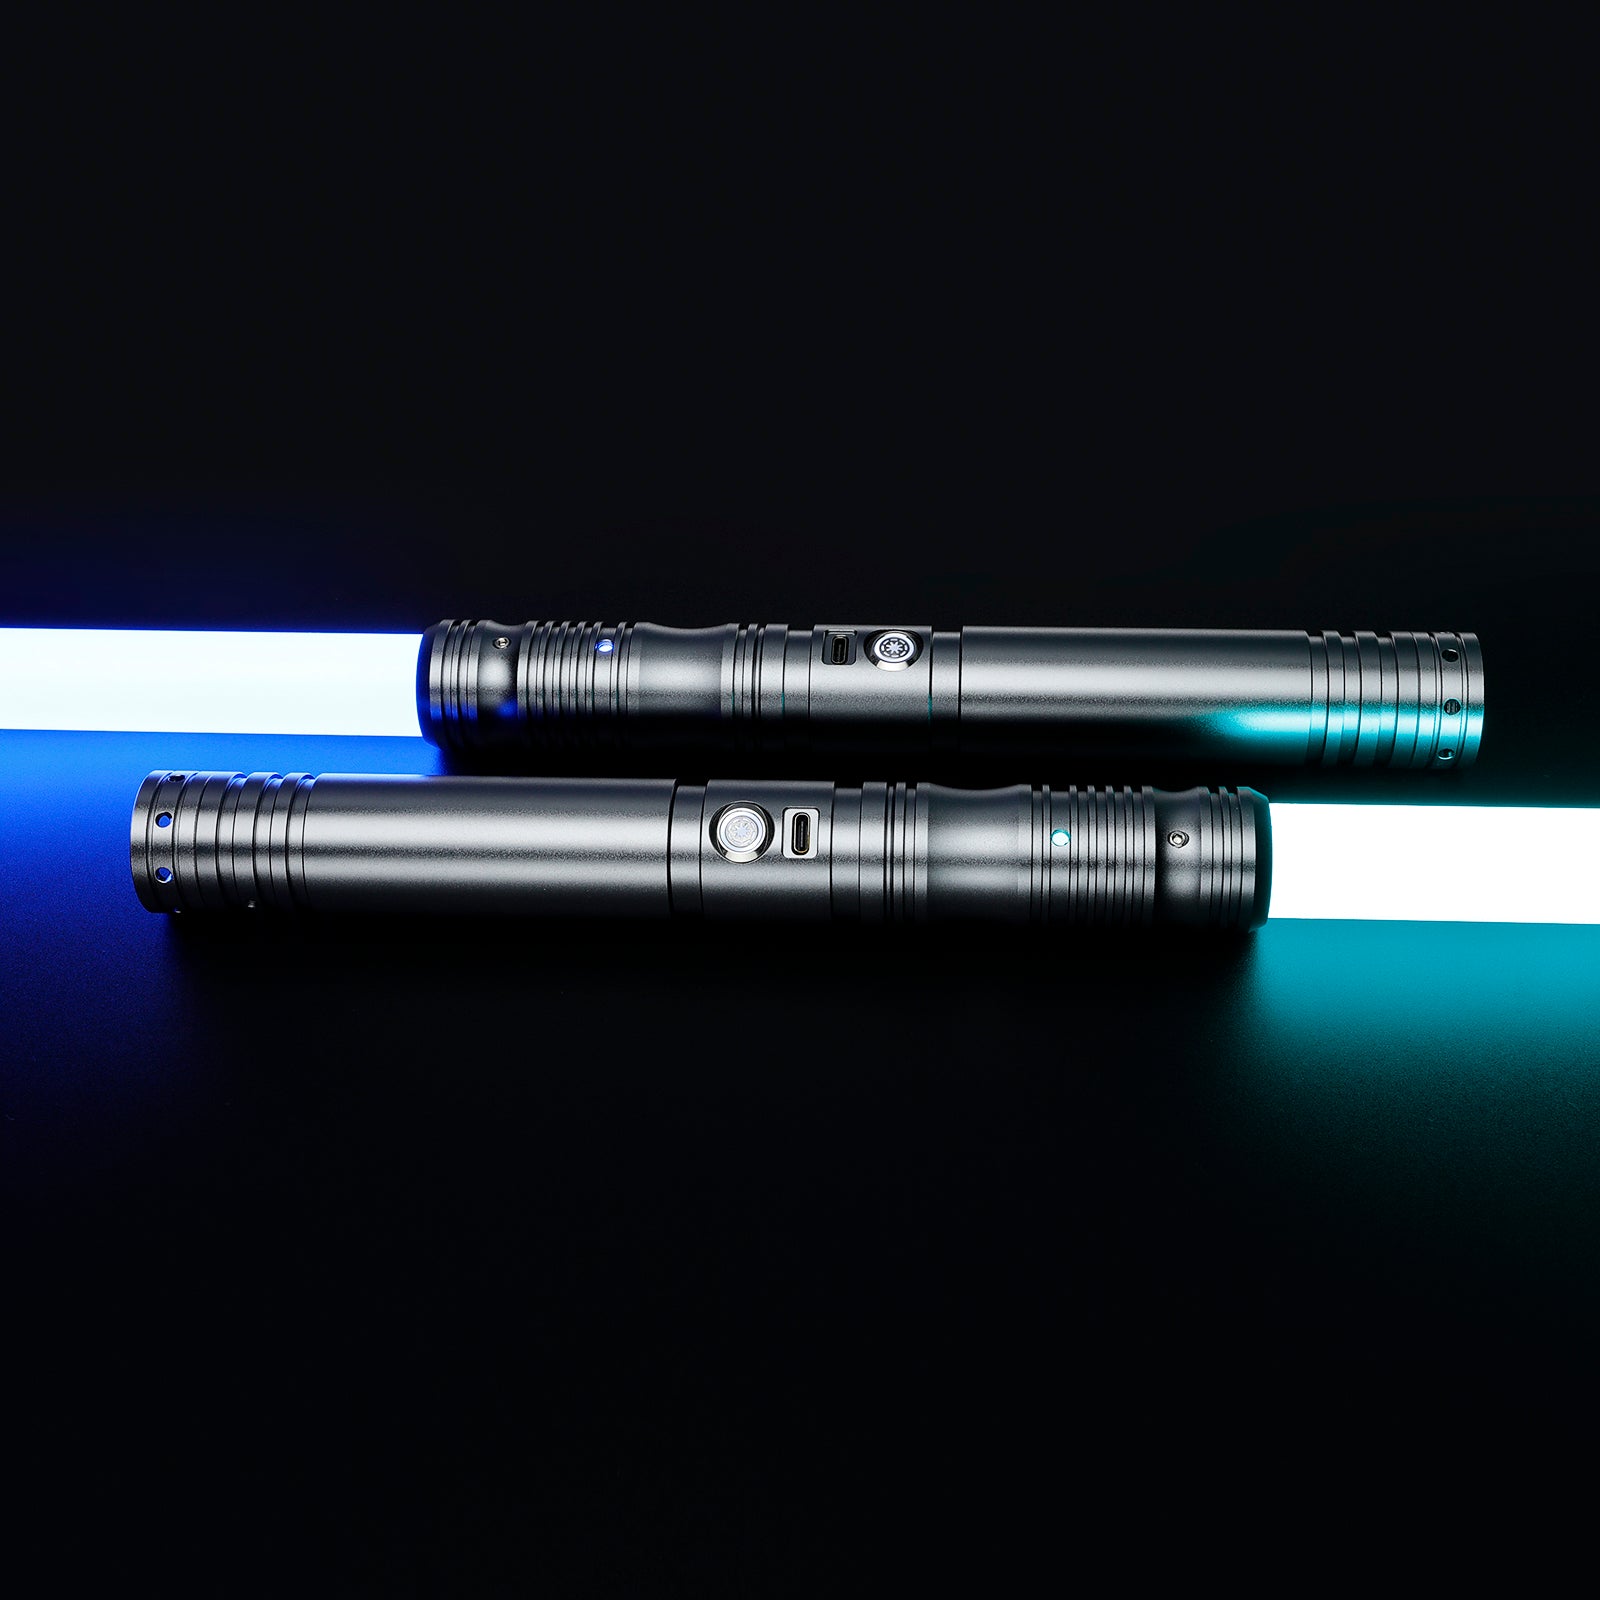 2 x SaberCustom heavy dueling lightsaber fx smooth swing 16 sound fonts infinite color changing 72CM blade NO0116 2 x Grey